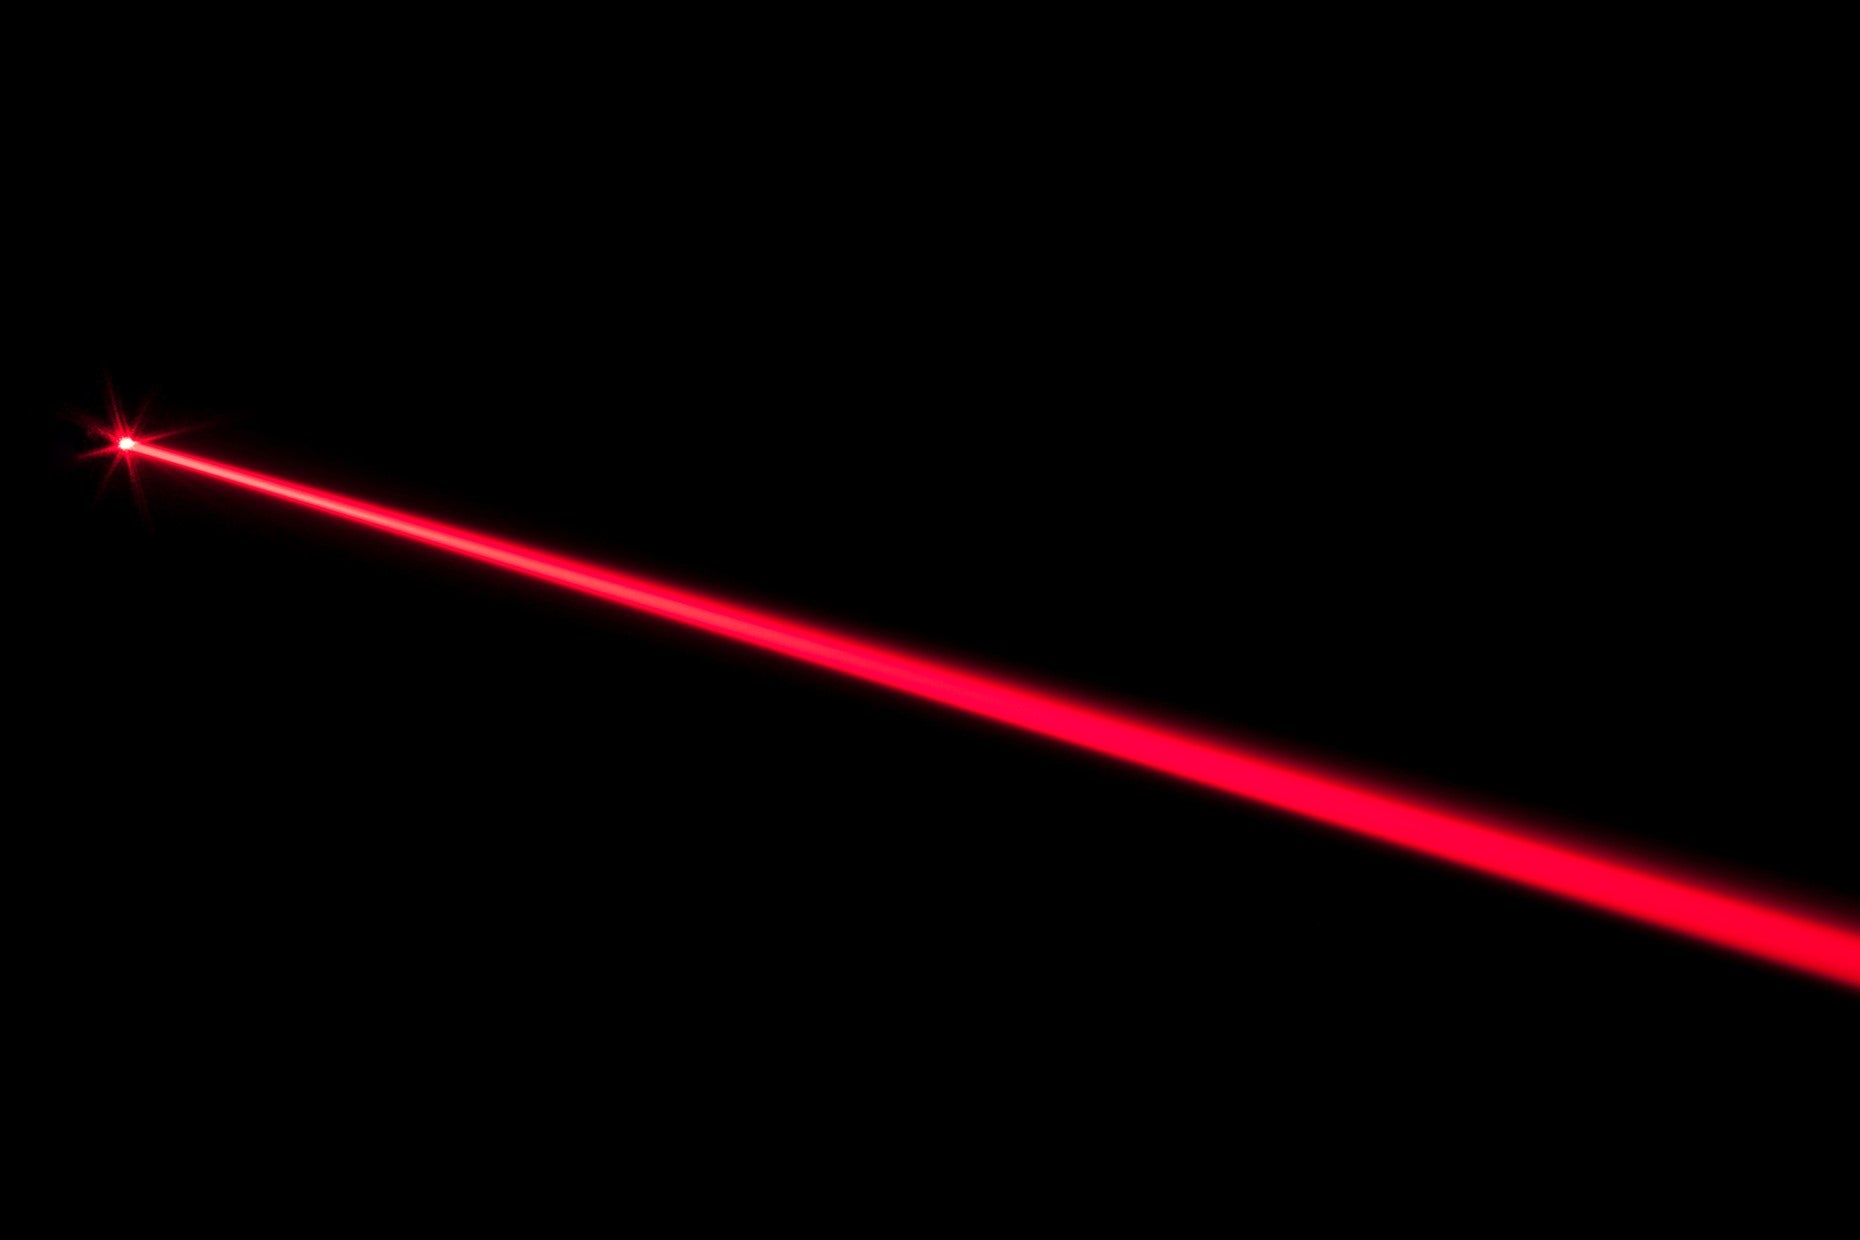 High-powered lasers are increasingly being used by militaries to target aerial threats like drones